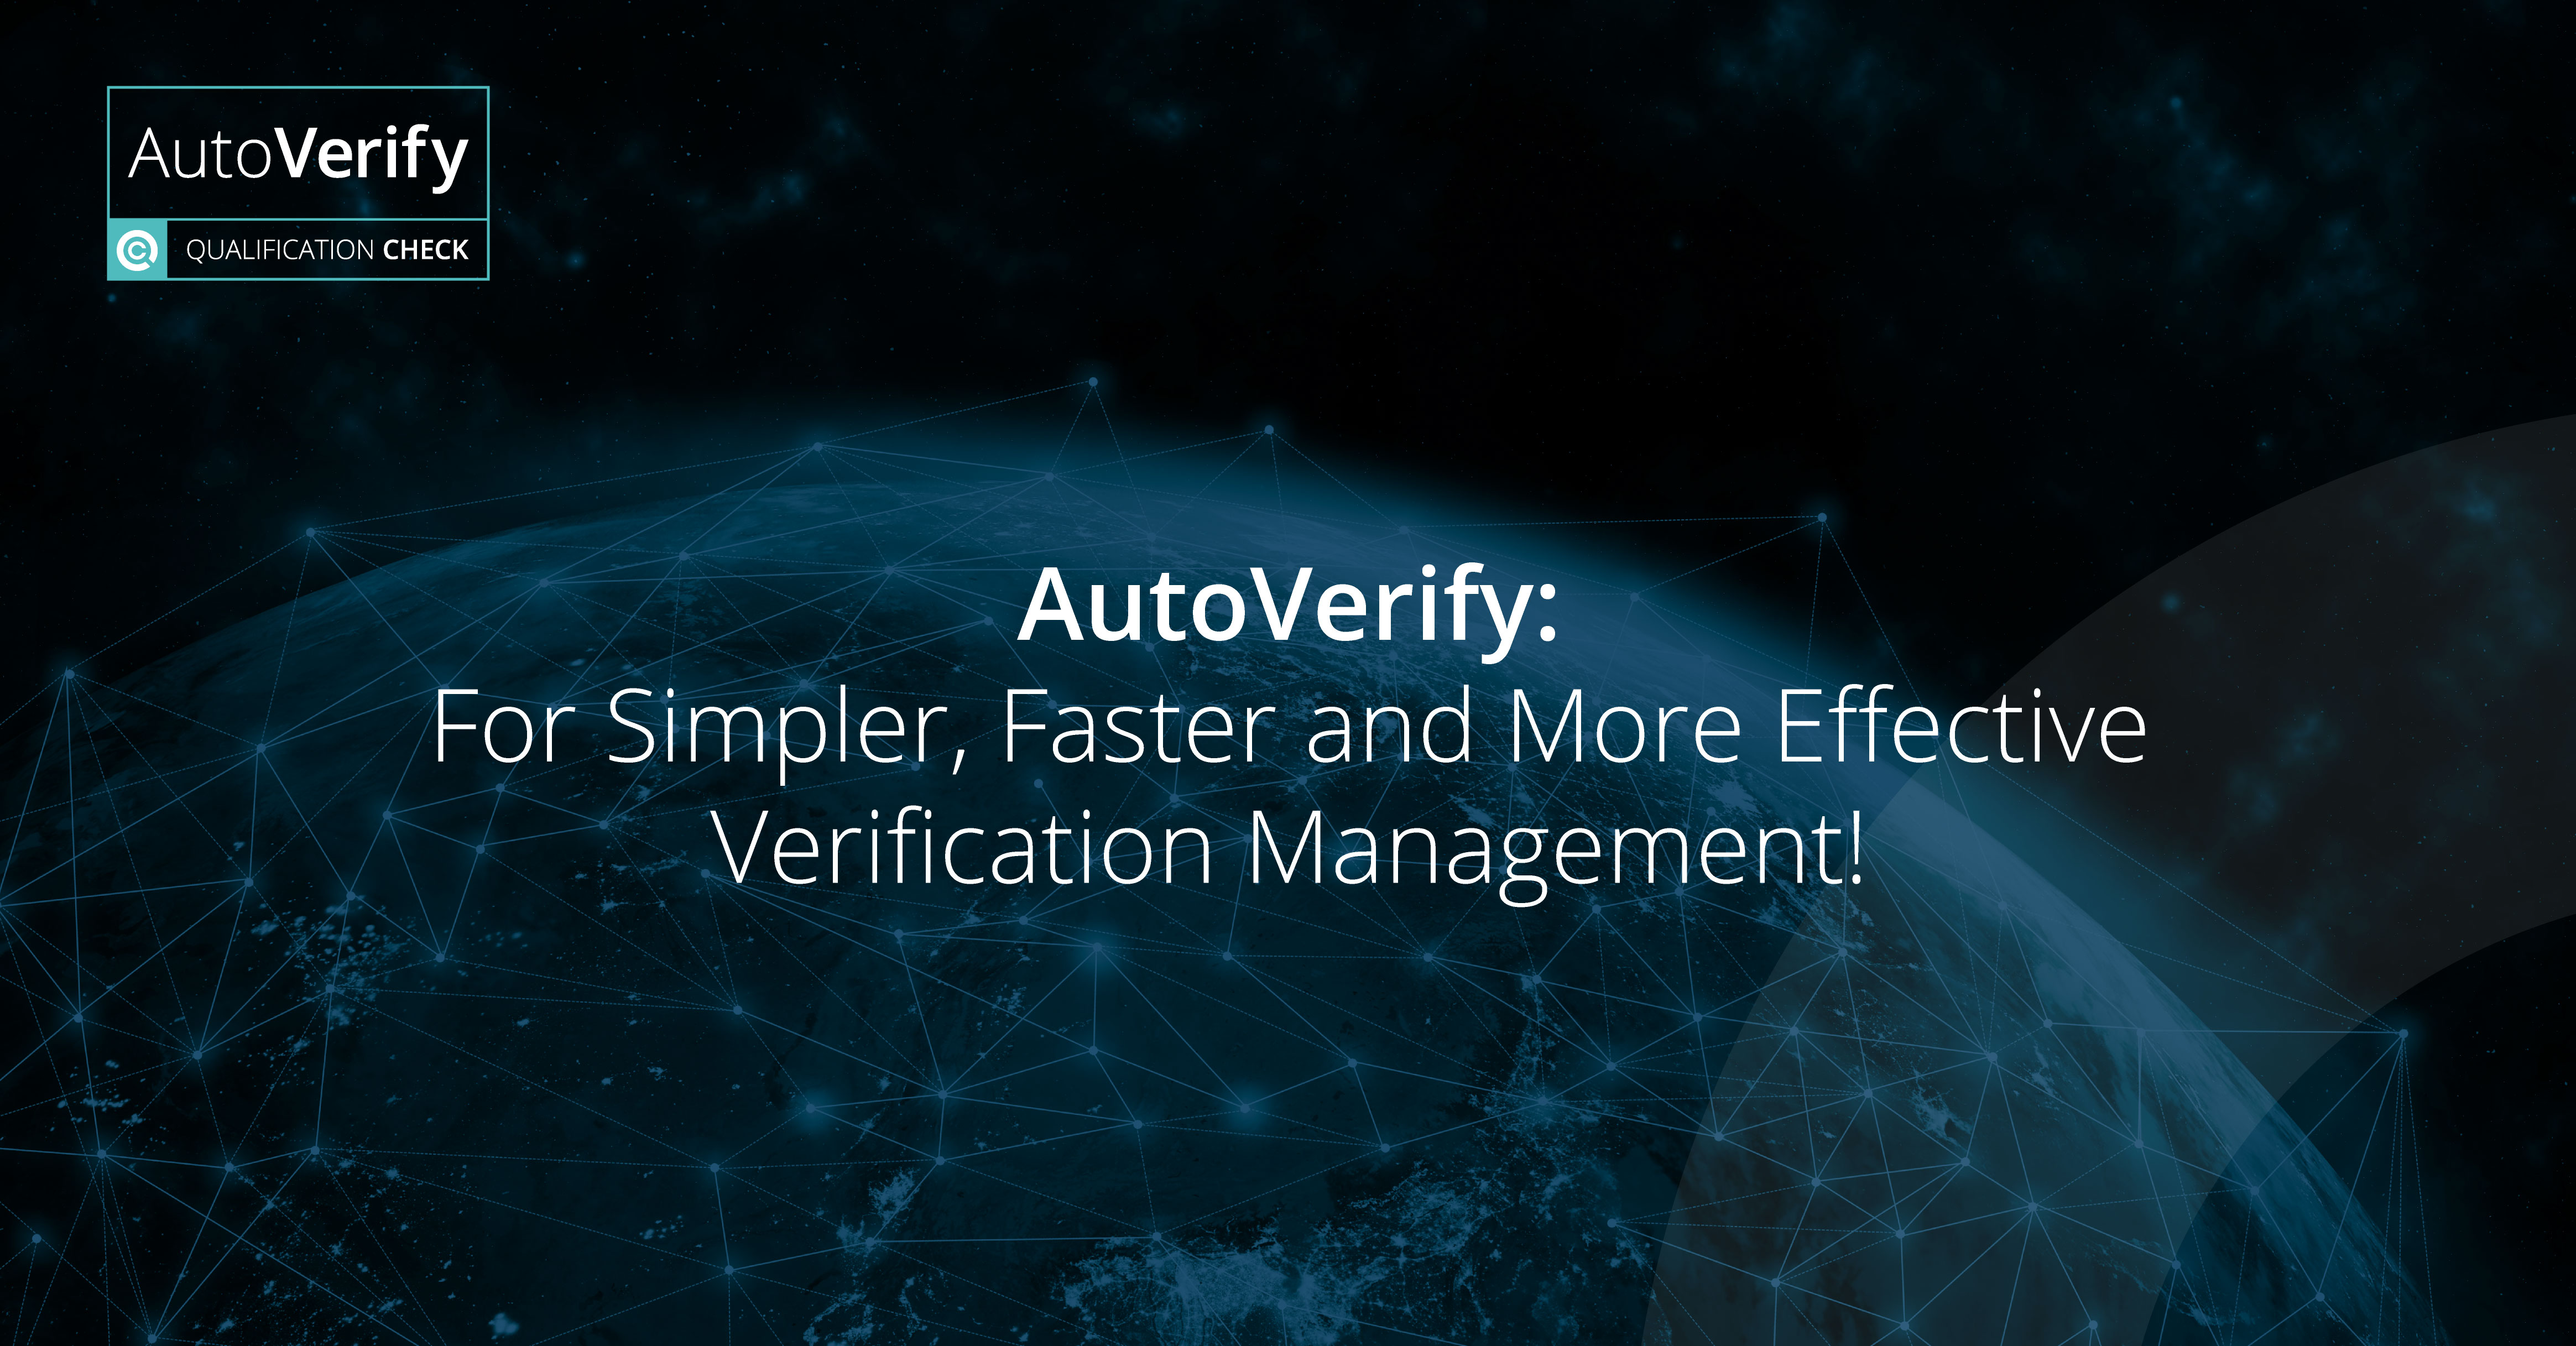 AutoVerify: For Simpler, Faster and More Effective Verification Management!